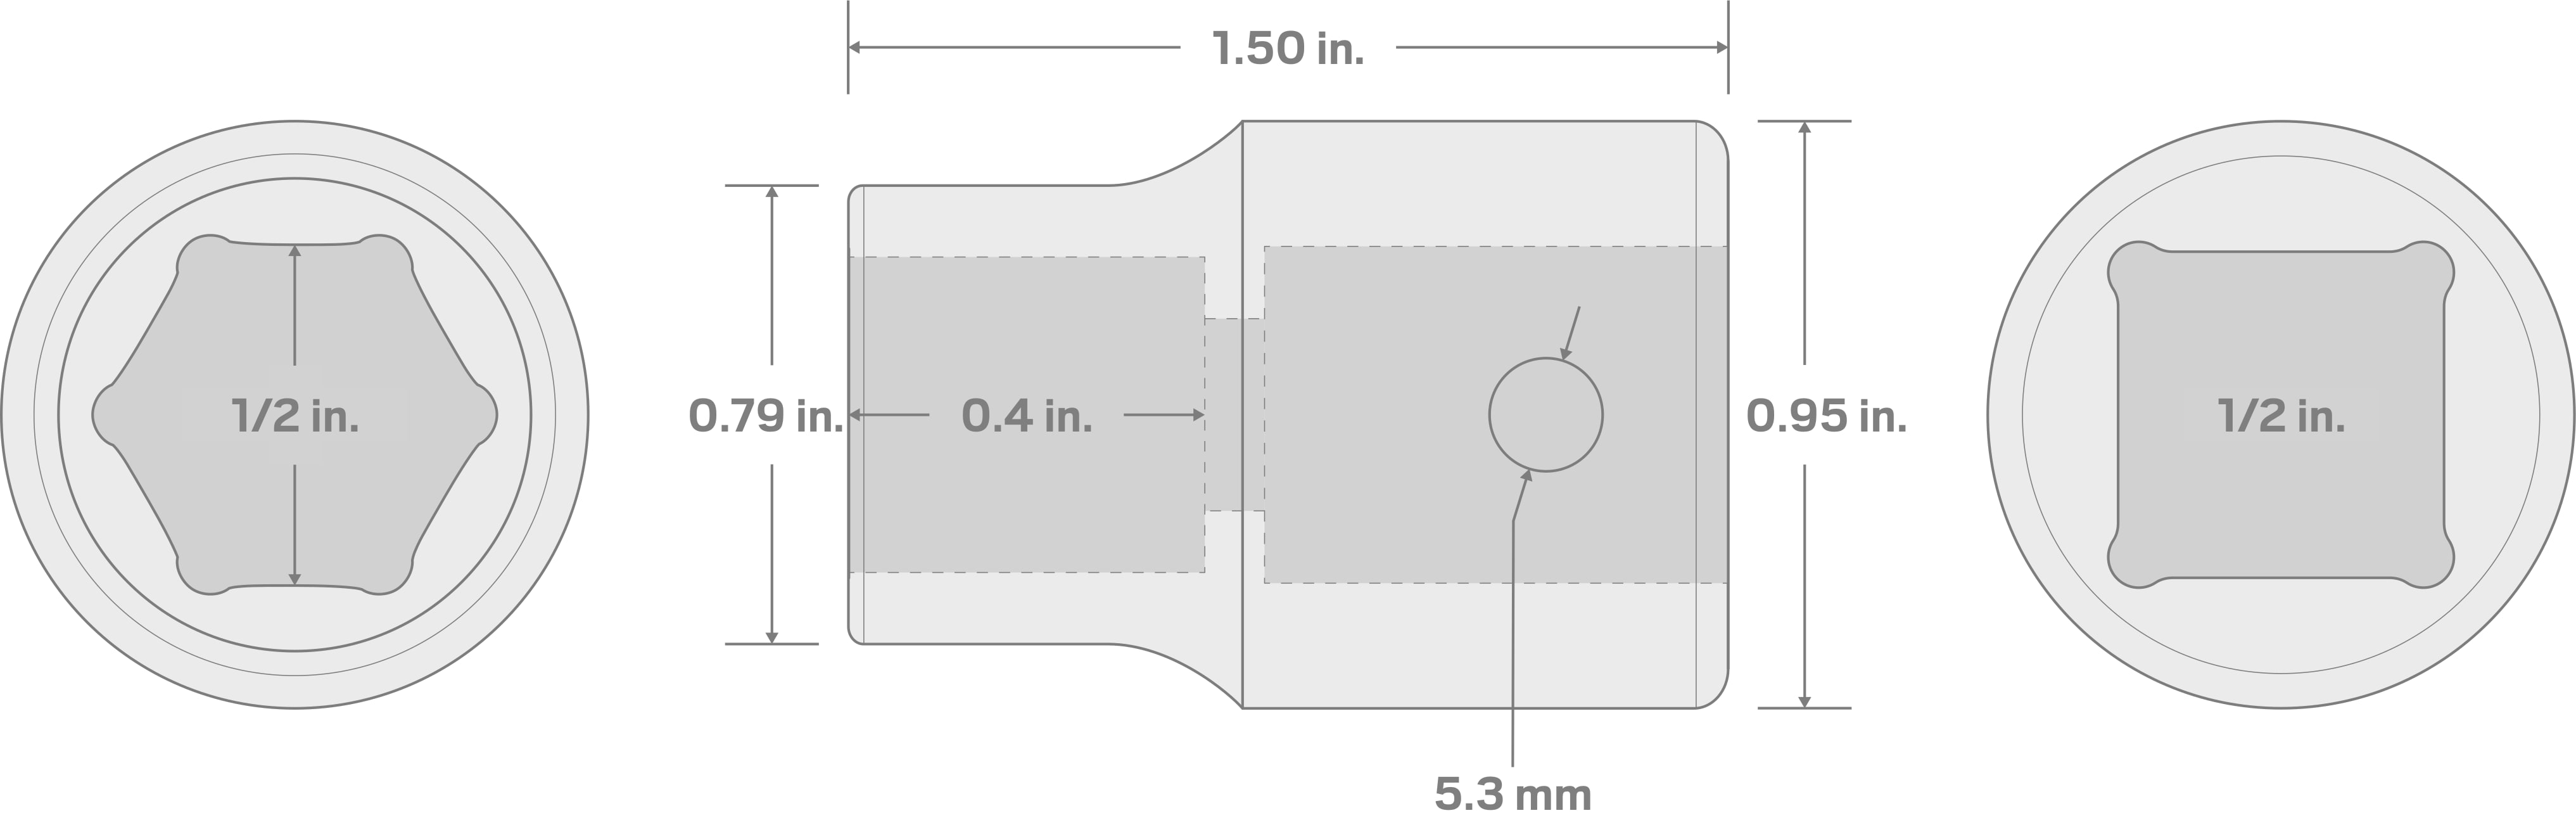 Specs for 1/2 Inch Drive x 1/2 Inch 6-Point Impact Socket